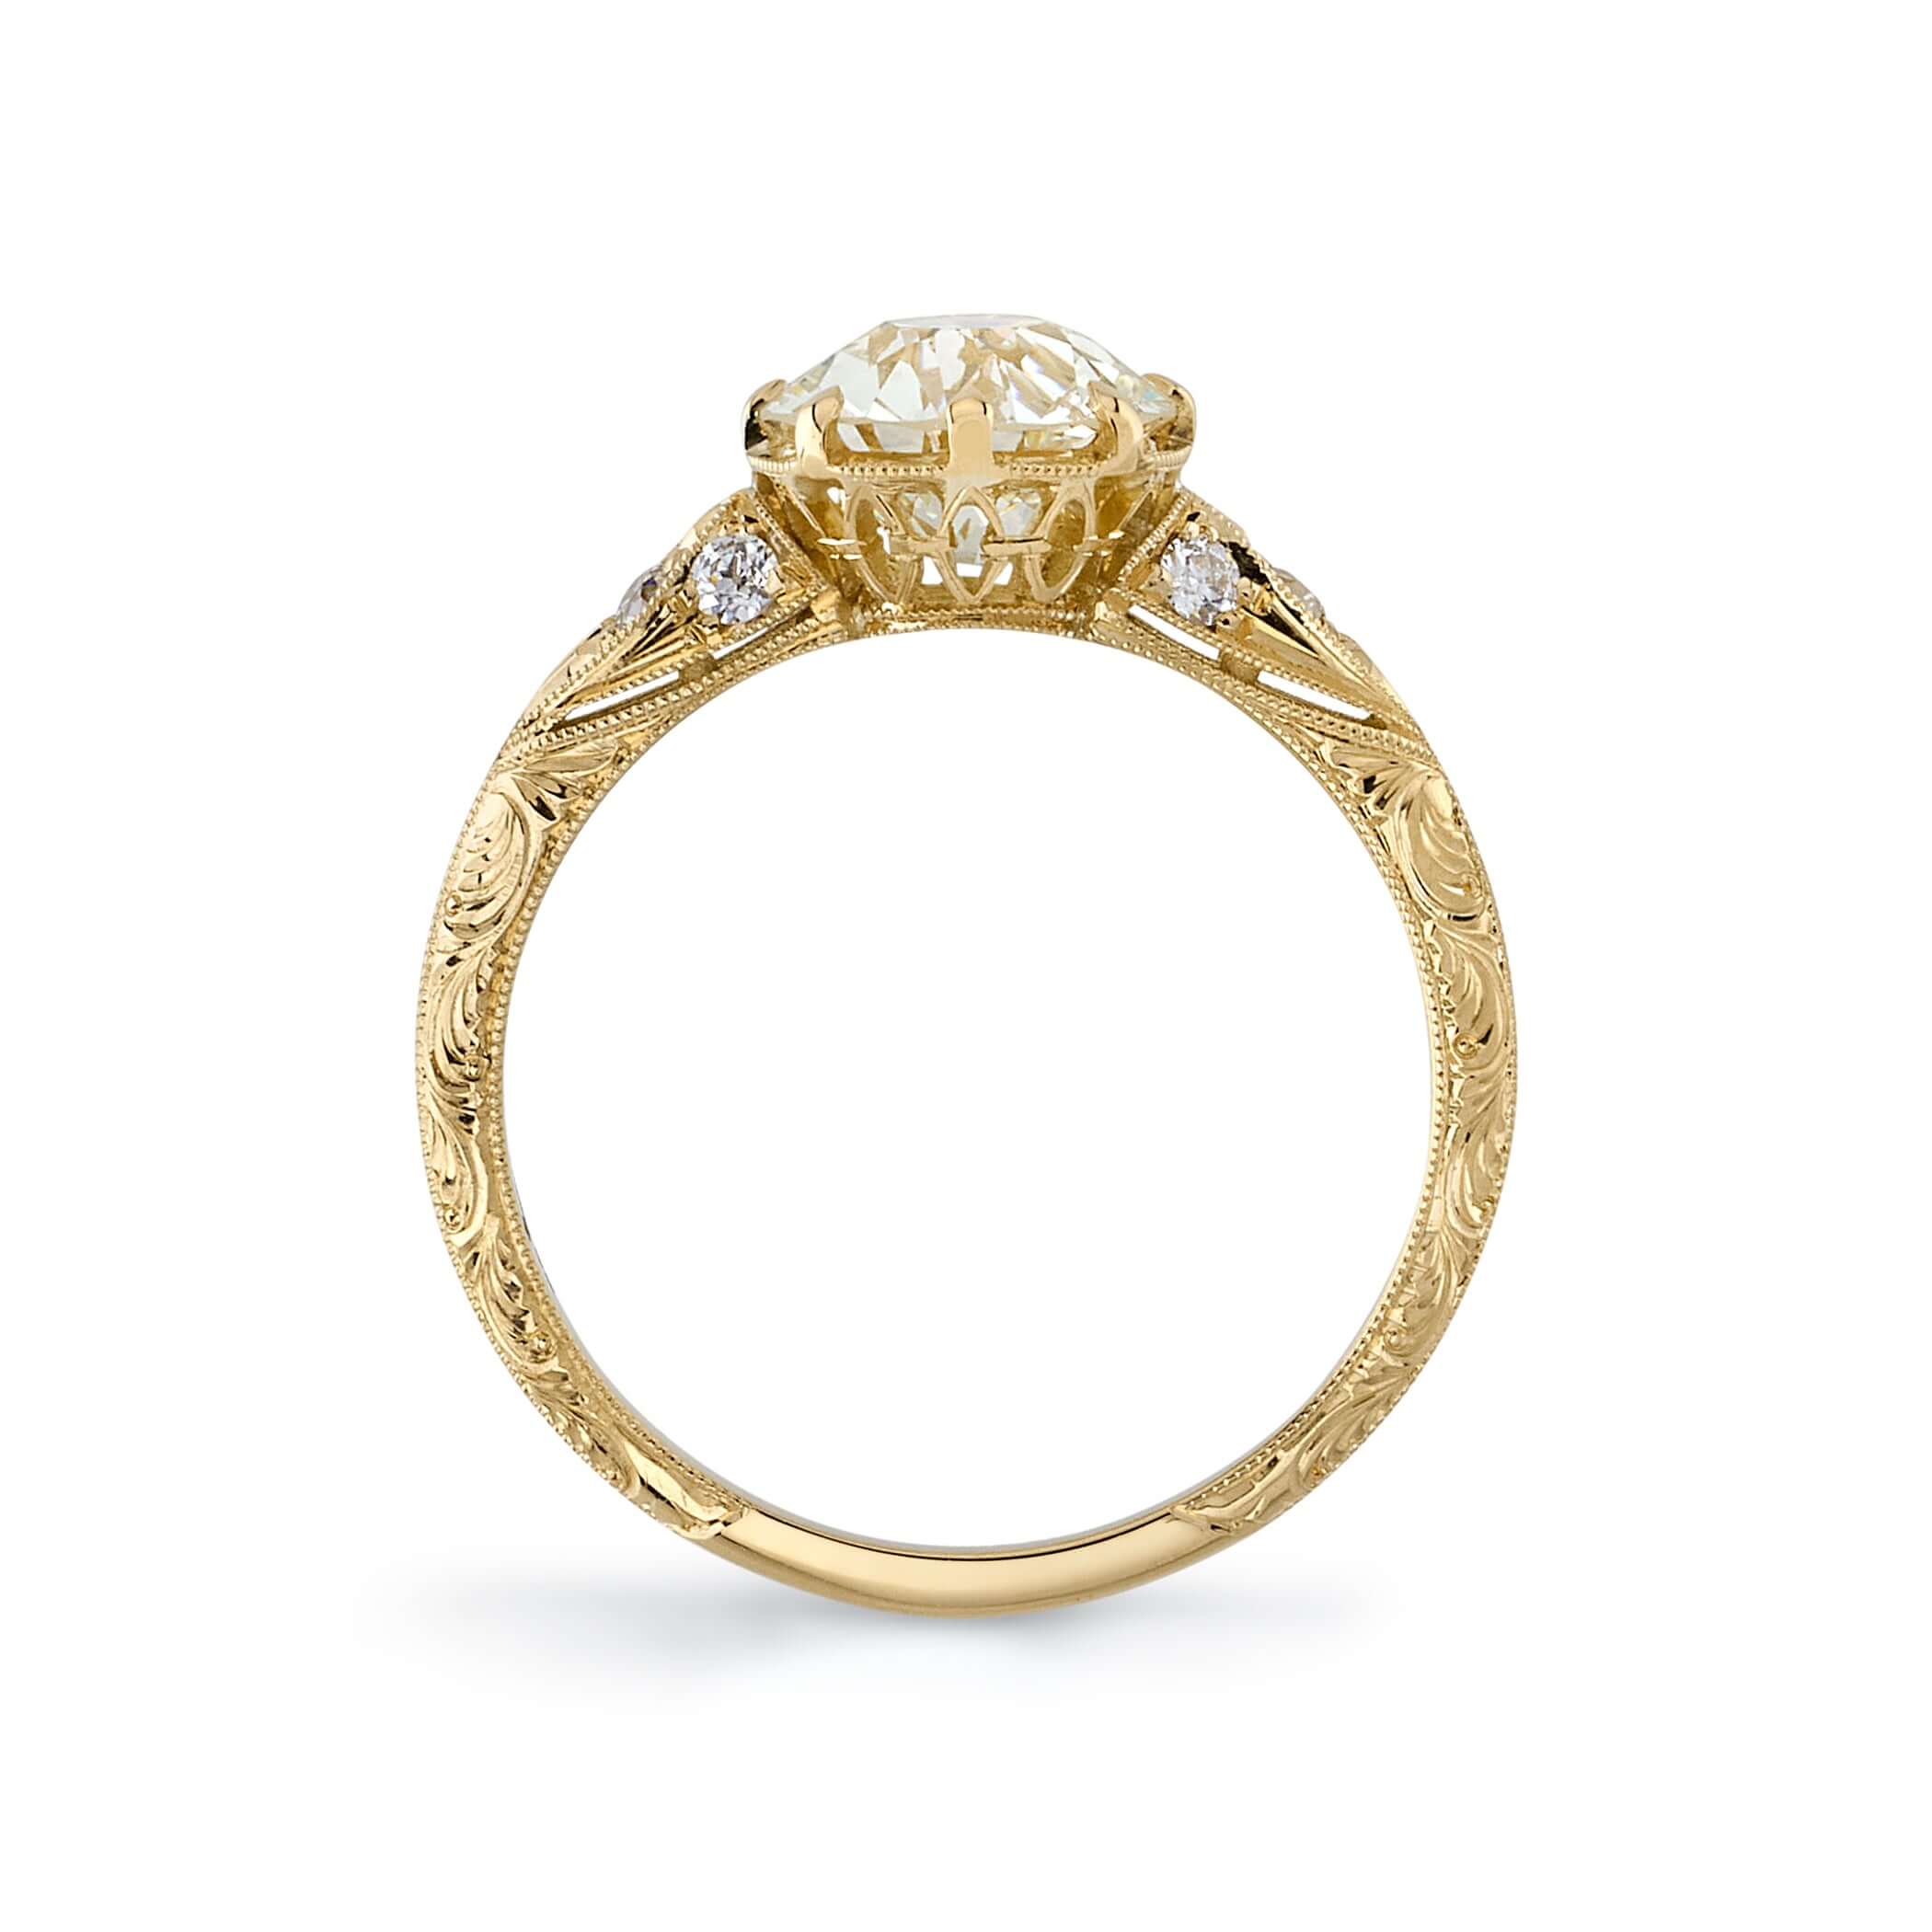 SINGLE STONE NICOLE RING featuring 1.53ct M/VS1 GIA certified old European cut diamond with 0.11ctw old European cut accent diamonds set in a handcrafted 18K yellow gold mounting.